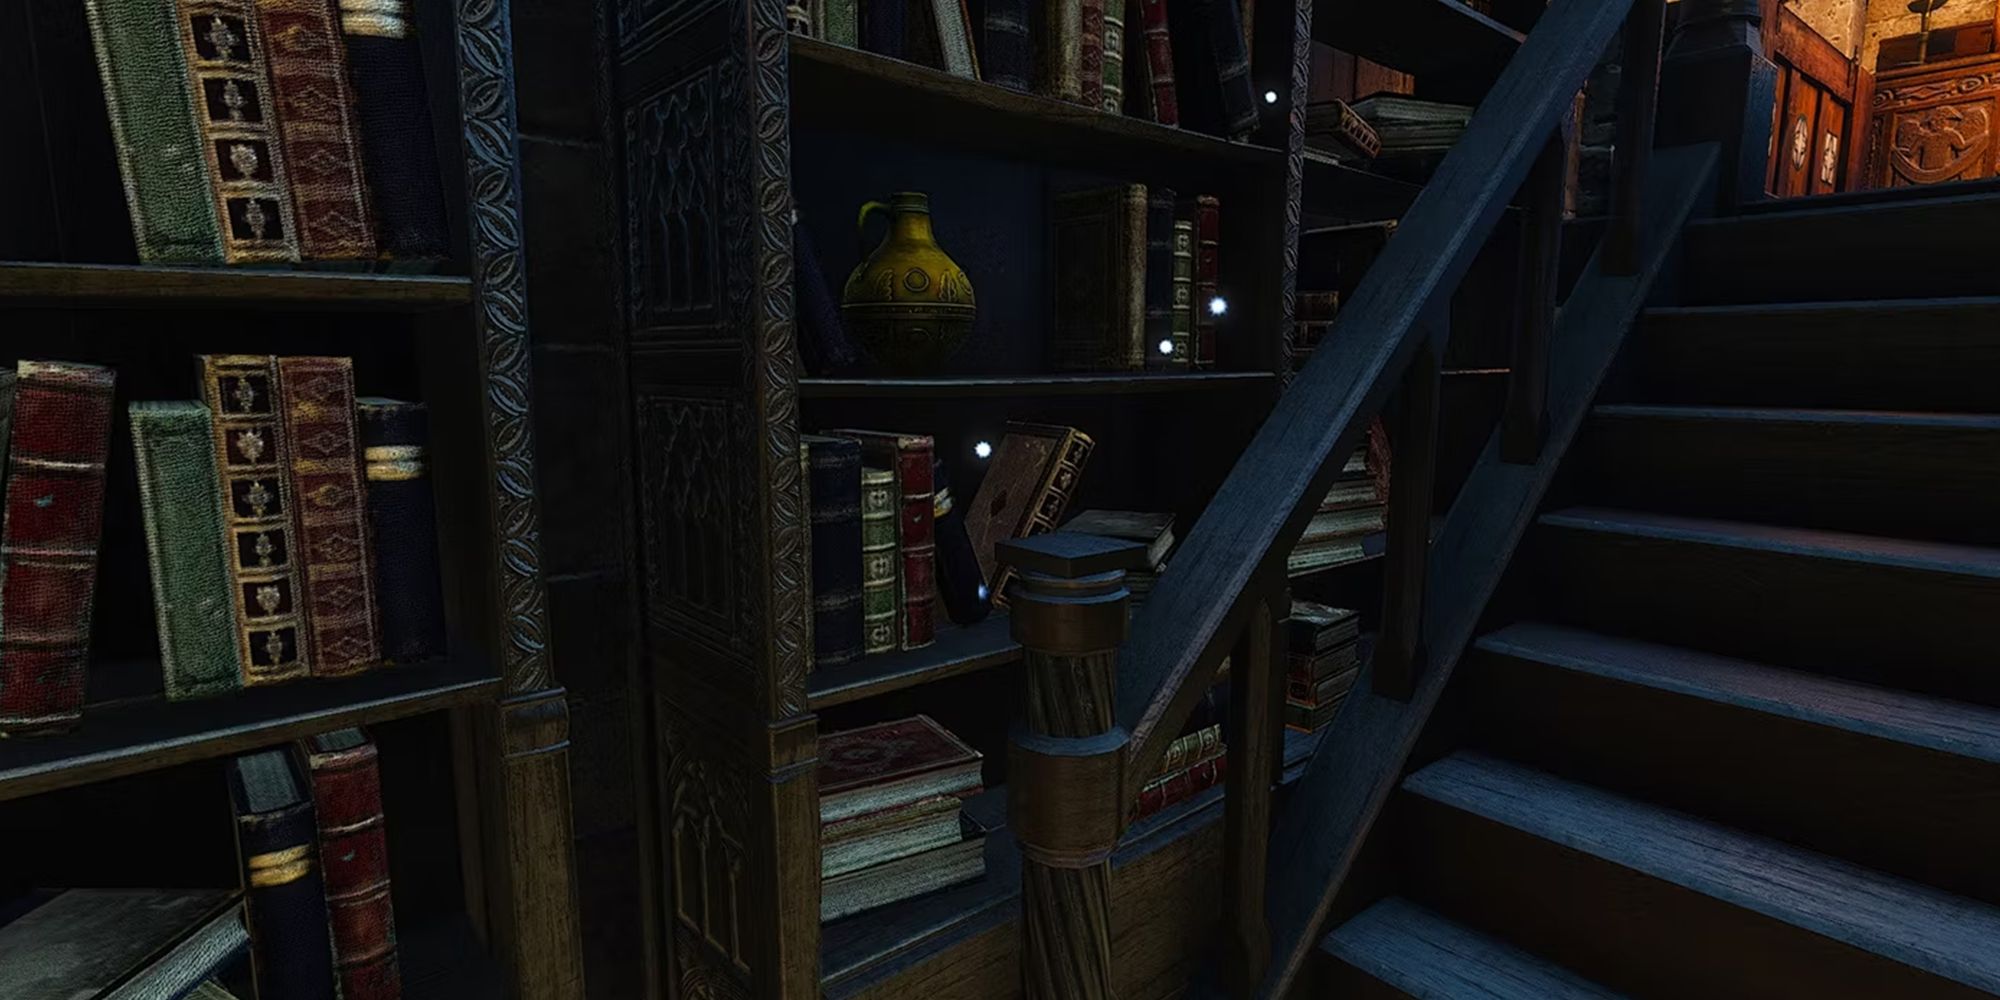 The Witcher 3 - Looking At A Bookshelf In-Game